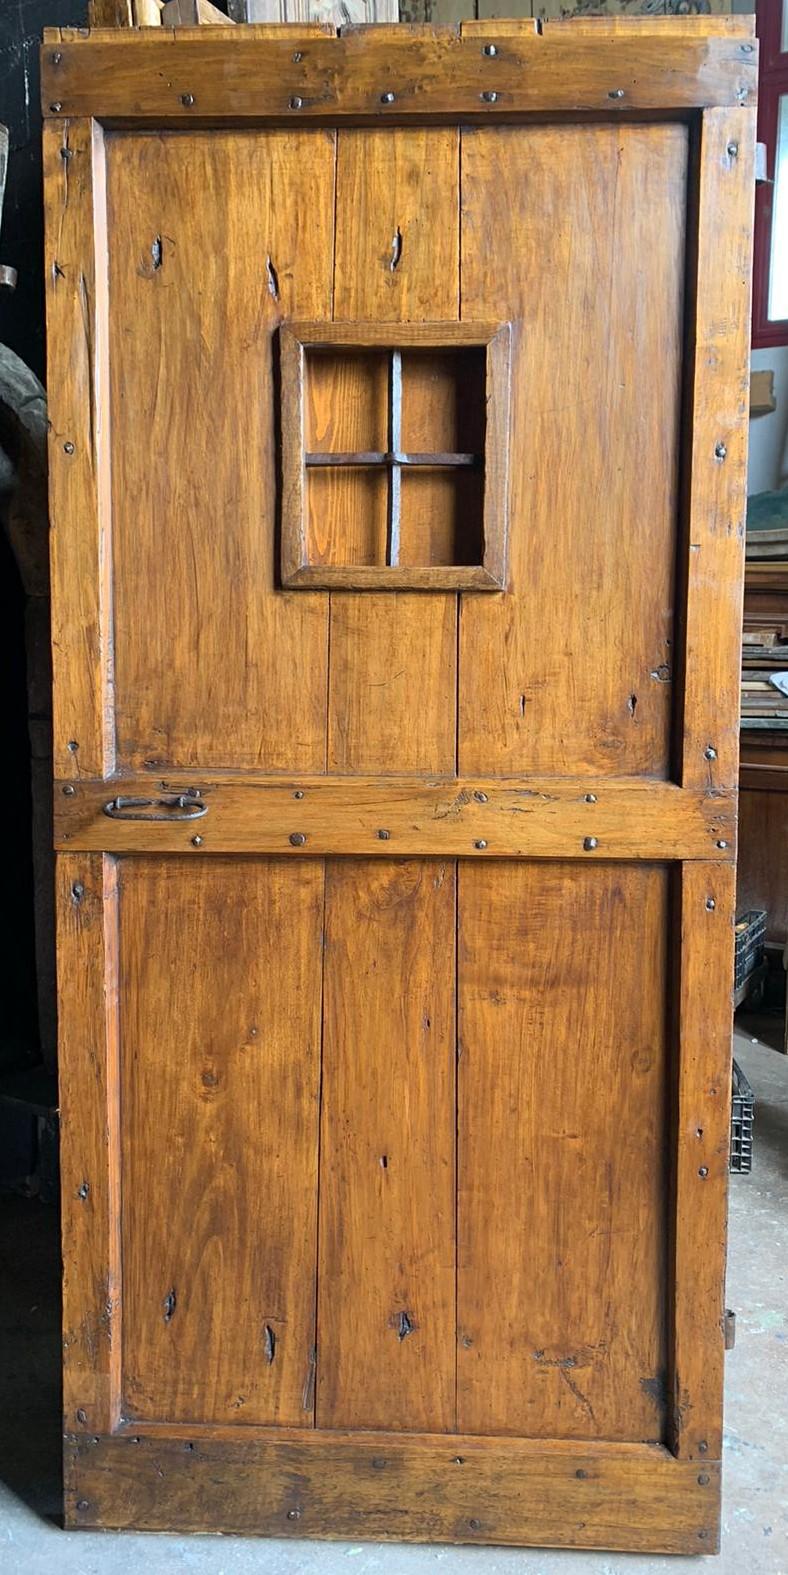 Hand-Crafted Rustic Door with Nails, in Poplar and Window, 19th Century Italy